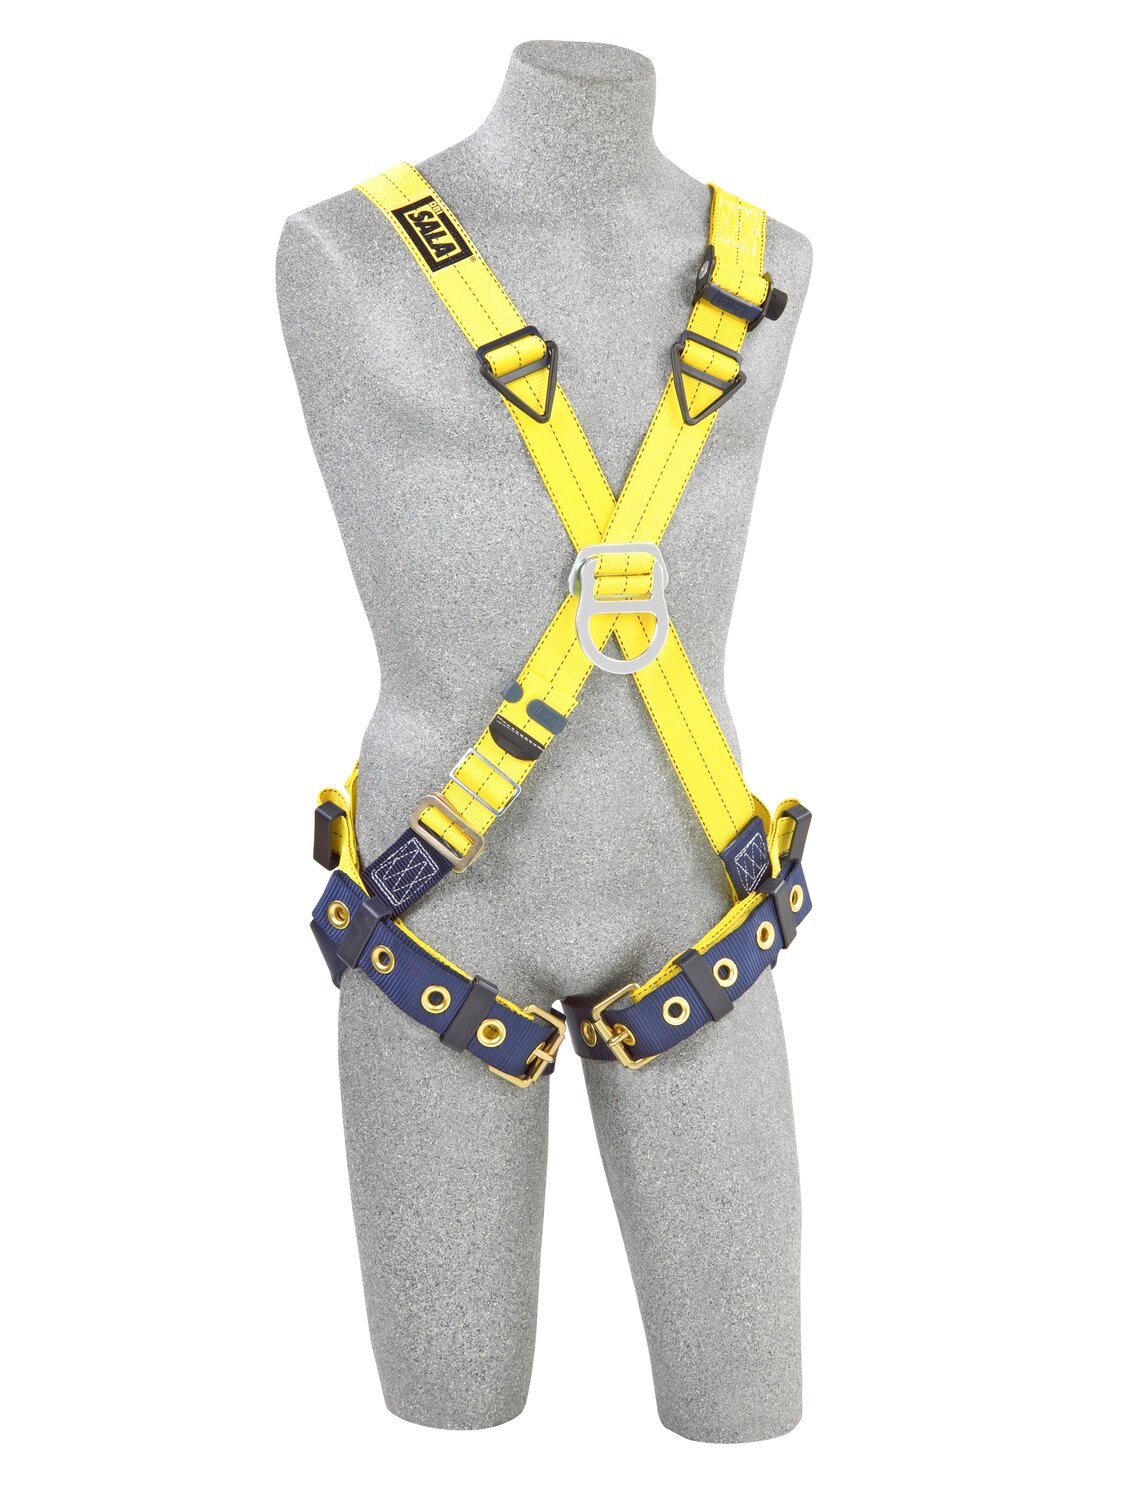 7012815419 - 3M DBI-SALA Delta Cross-Over Climbing Safety Harness 1102957, X-Small